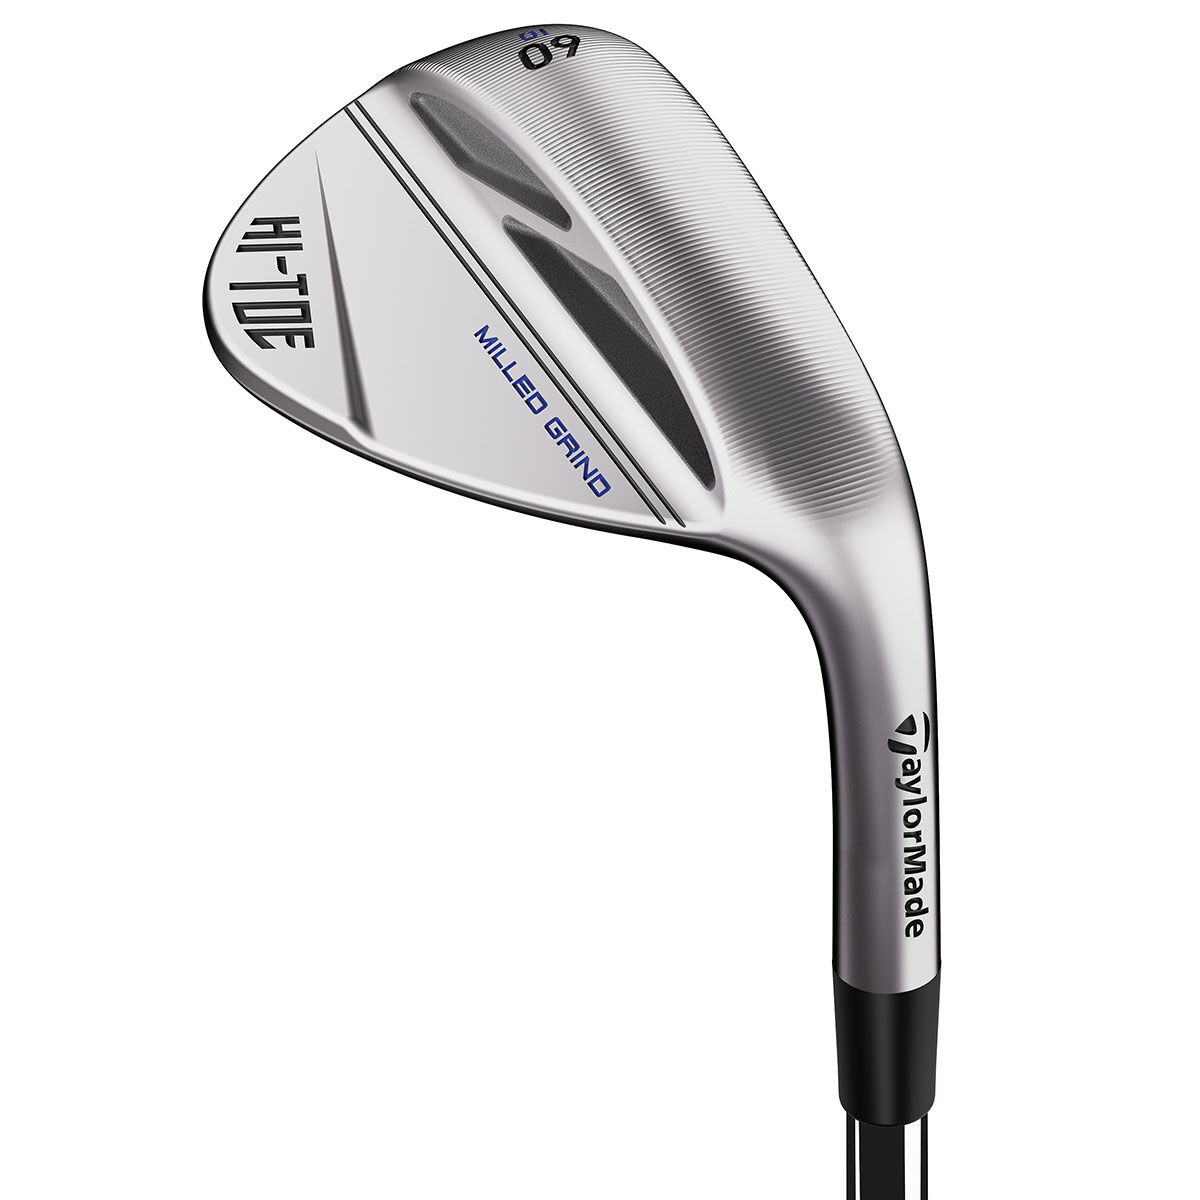 TaylorMade Men's Grey and Black Hi-Toe 3 Chrome Steel Right Hand Golf Wedge, Size: 54° | American Golf von TaylorMade